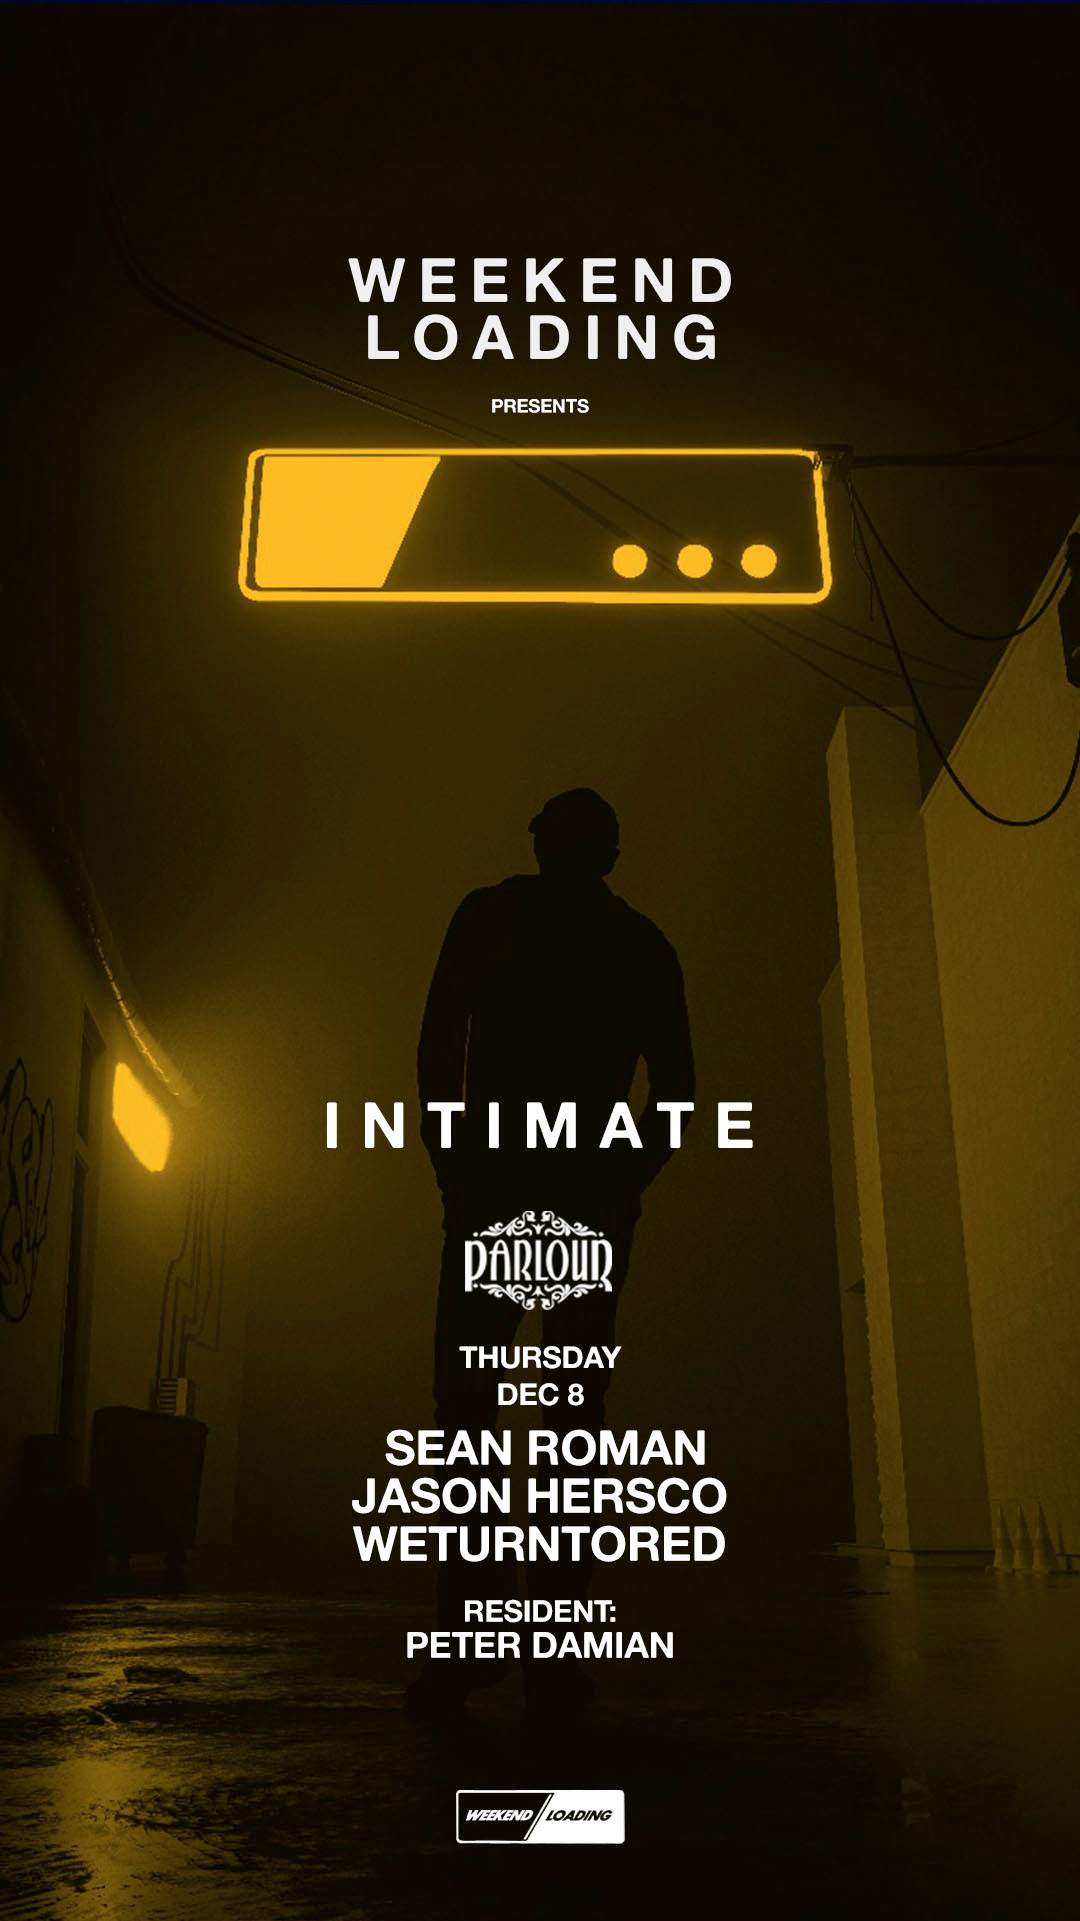 Weekend Loading presents: INTIMATE: Thursday December 8th - フライヤー裏